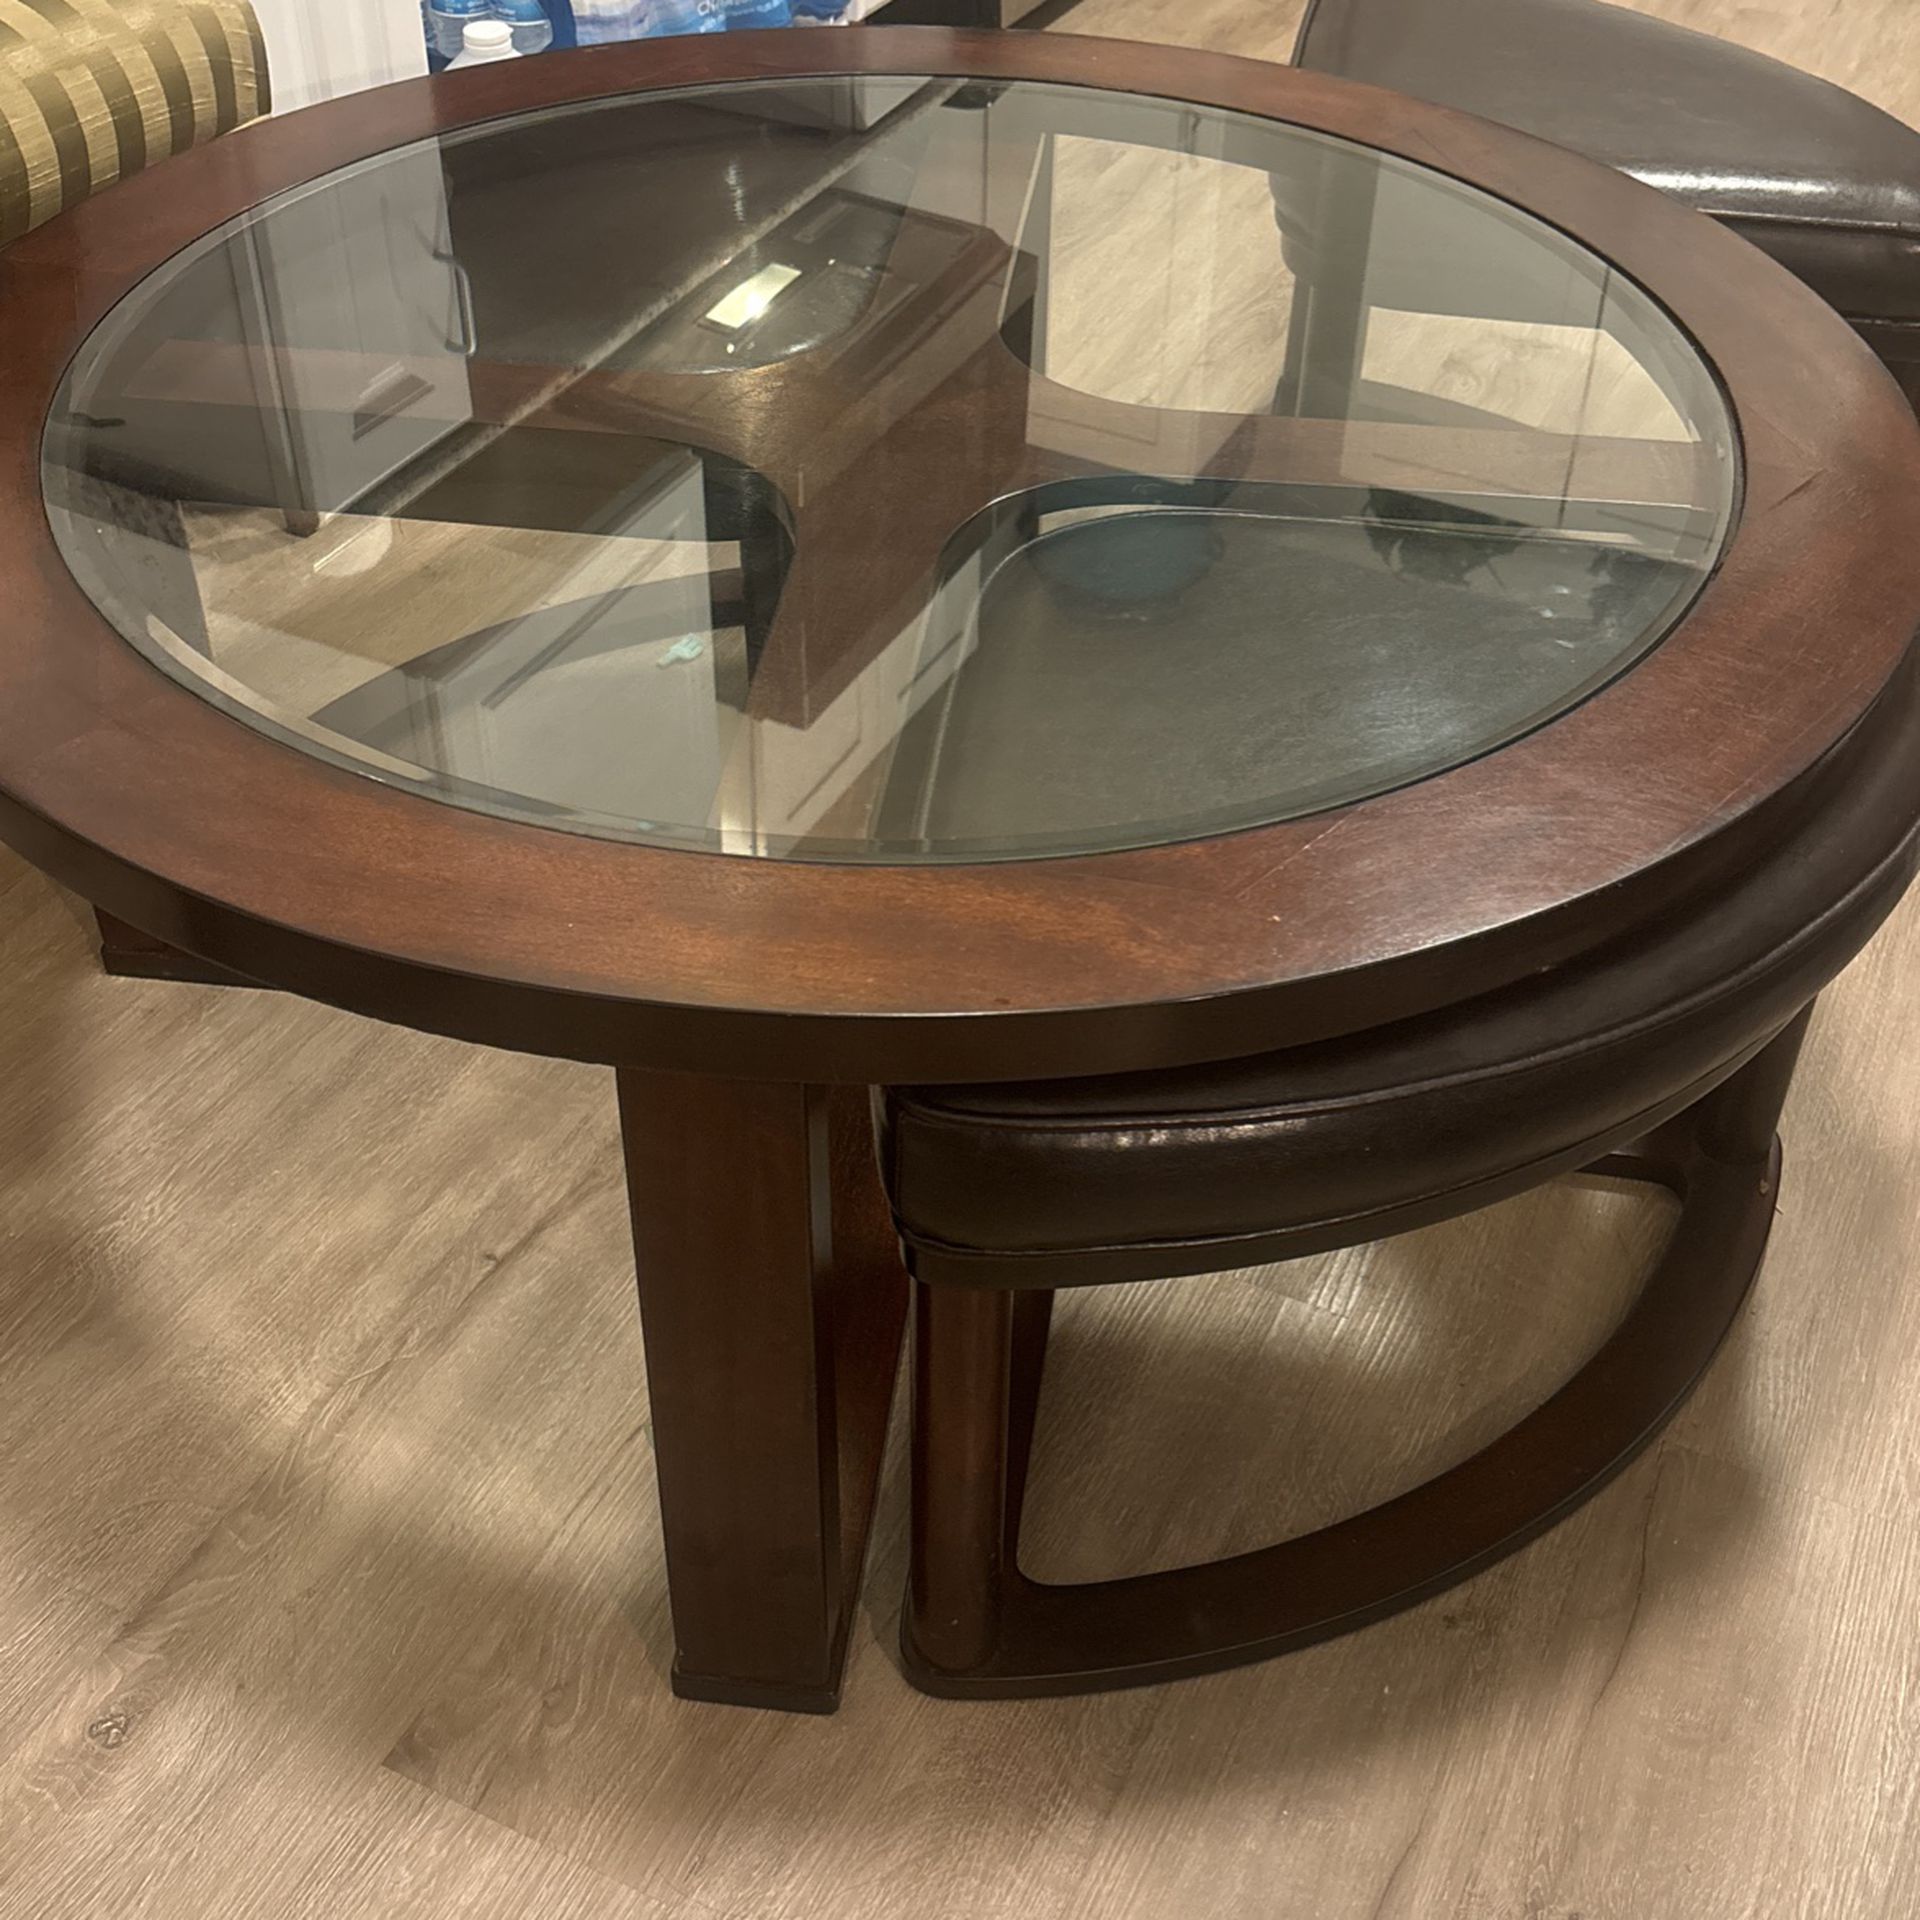 Round Wooden Table Glass top 